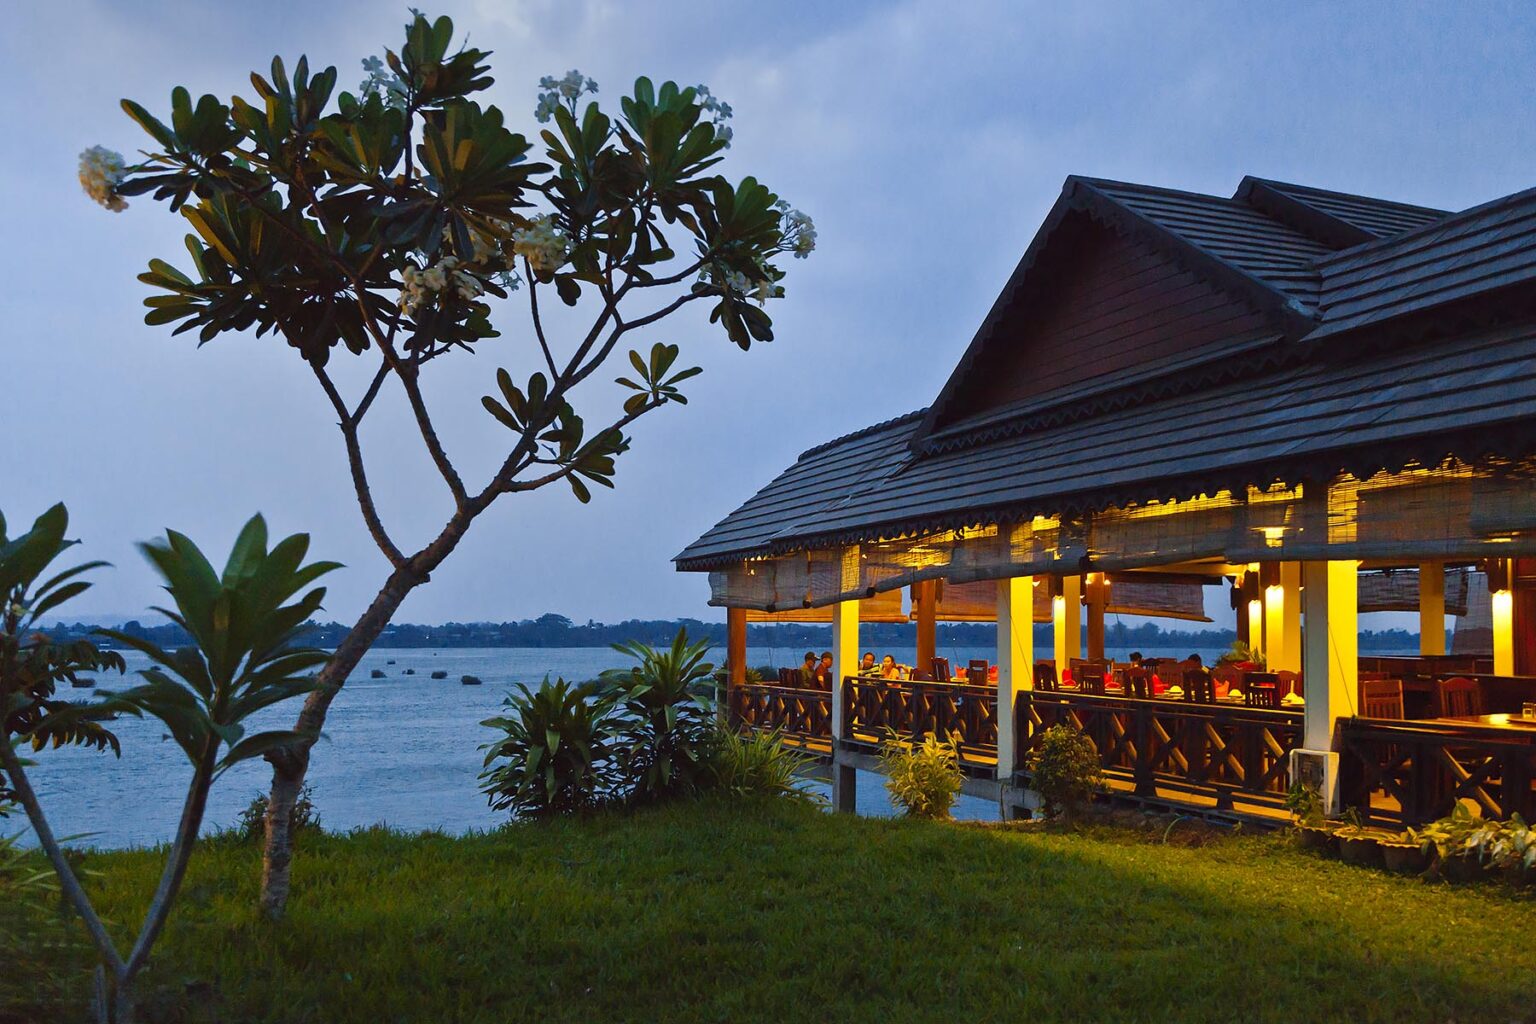 The PAN ARENA HOTEL RESTAURANT on DON KHONG ISLAND in the 10 Thousand Islands area of the Mekong River - SOUTHERN, LAOS